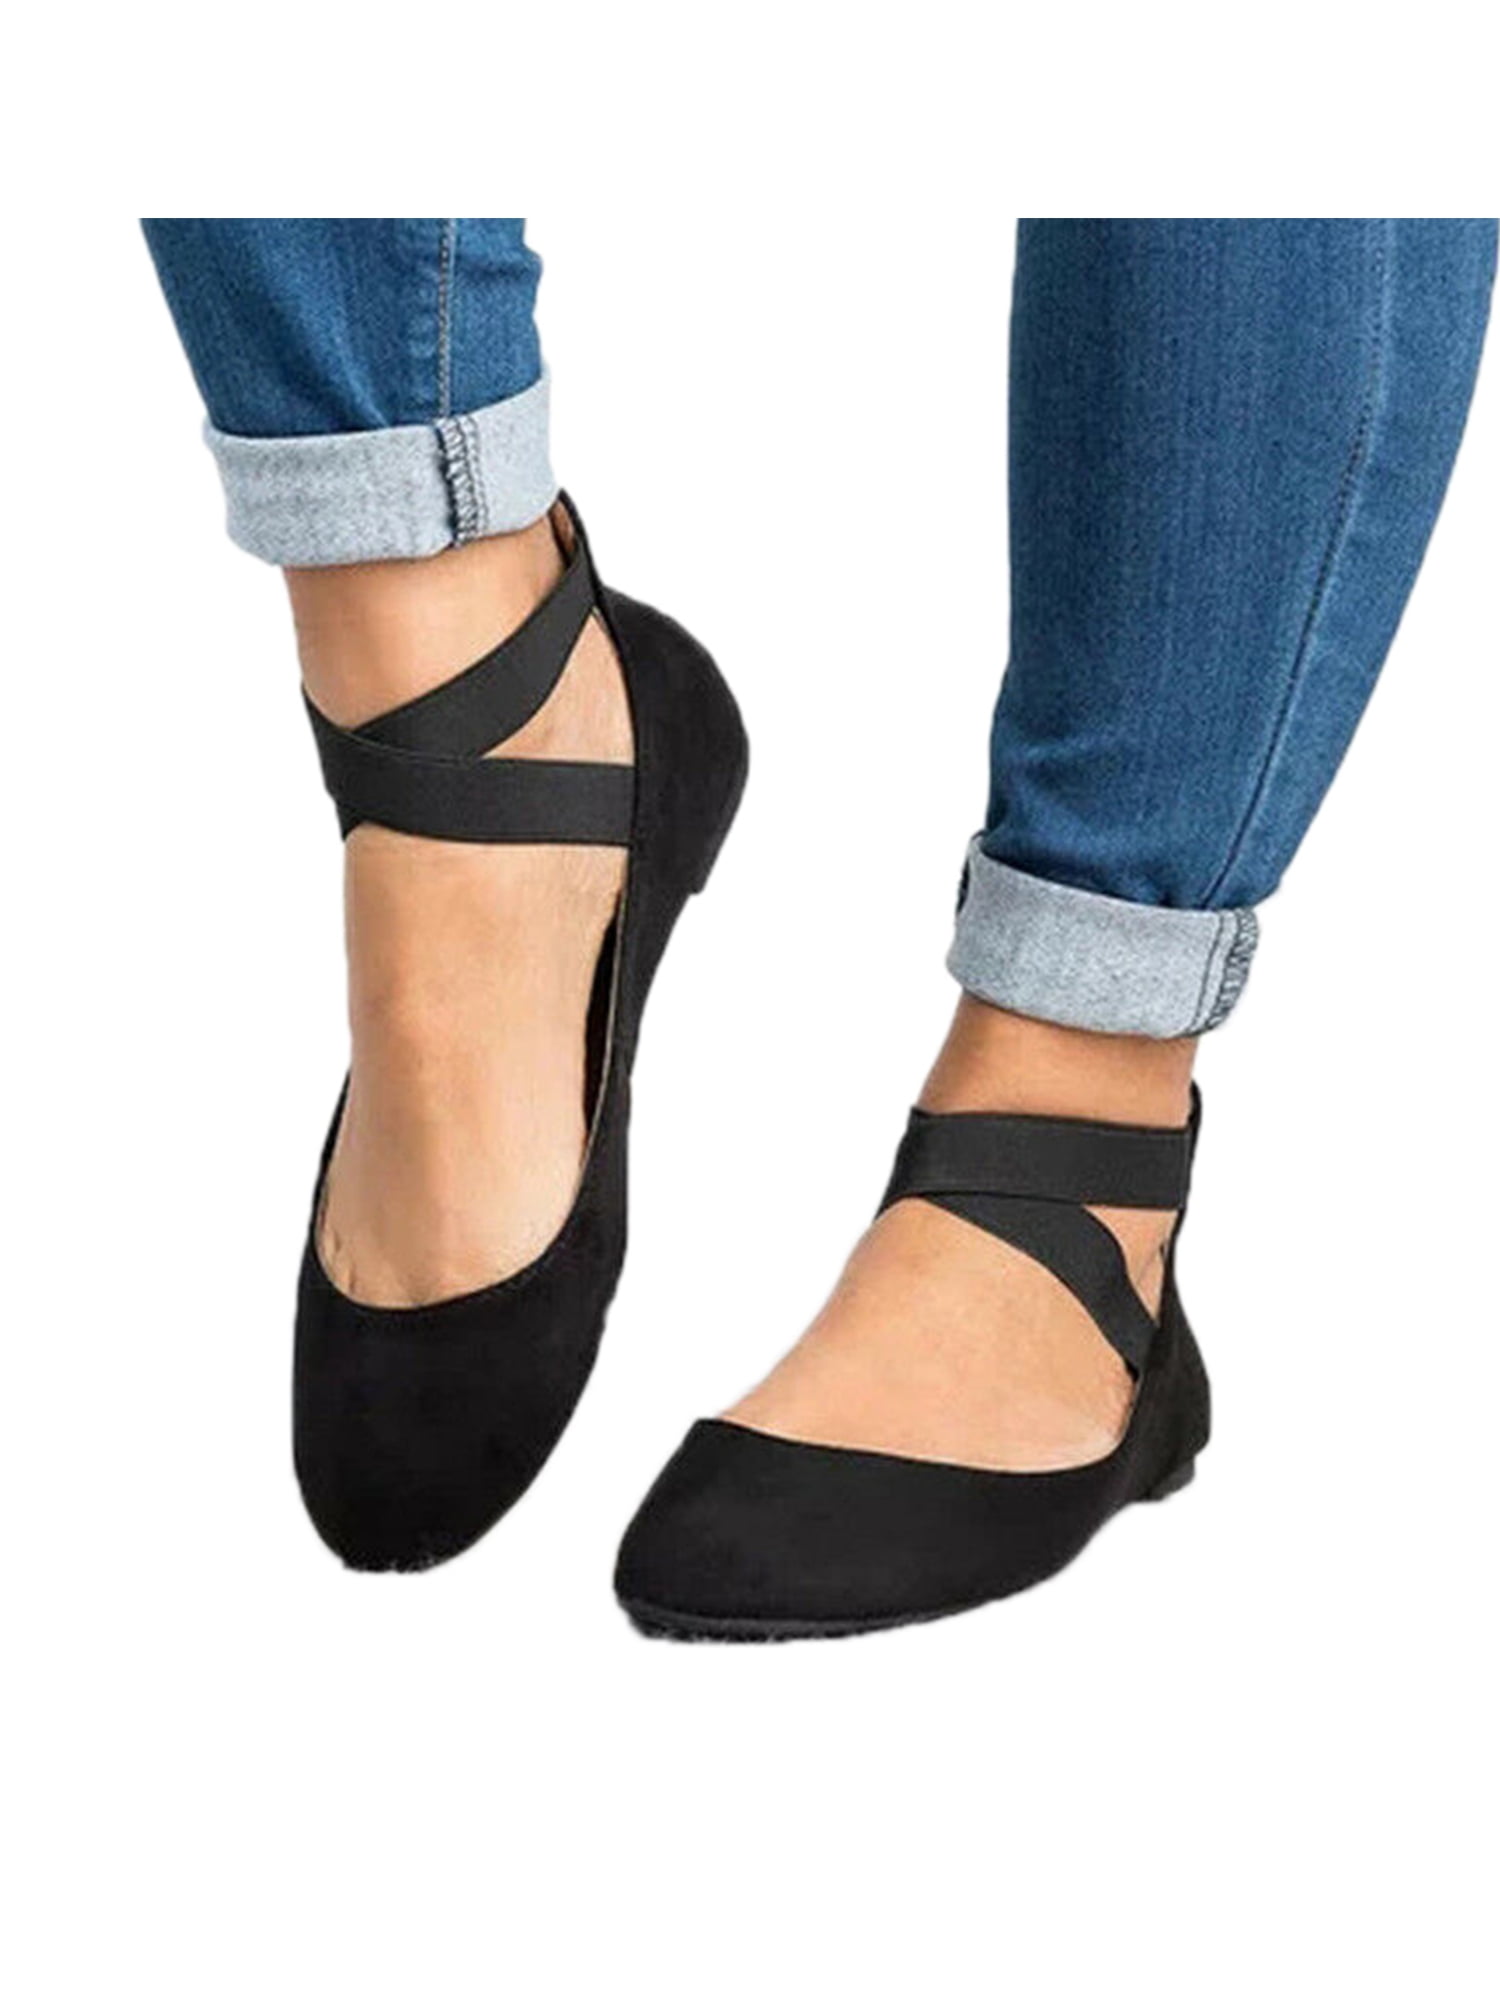 Details about   Women's Ankle Strap Casual Shoes Mary Janes Wedge Heel Dancing Shoes Pumps Heels 